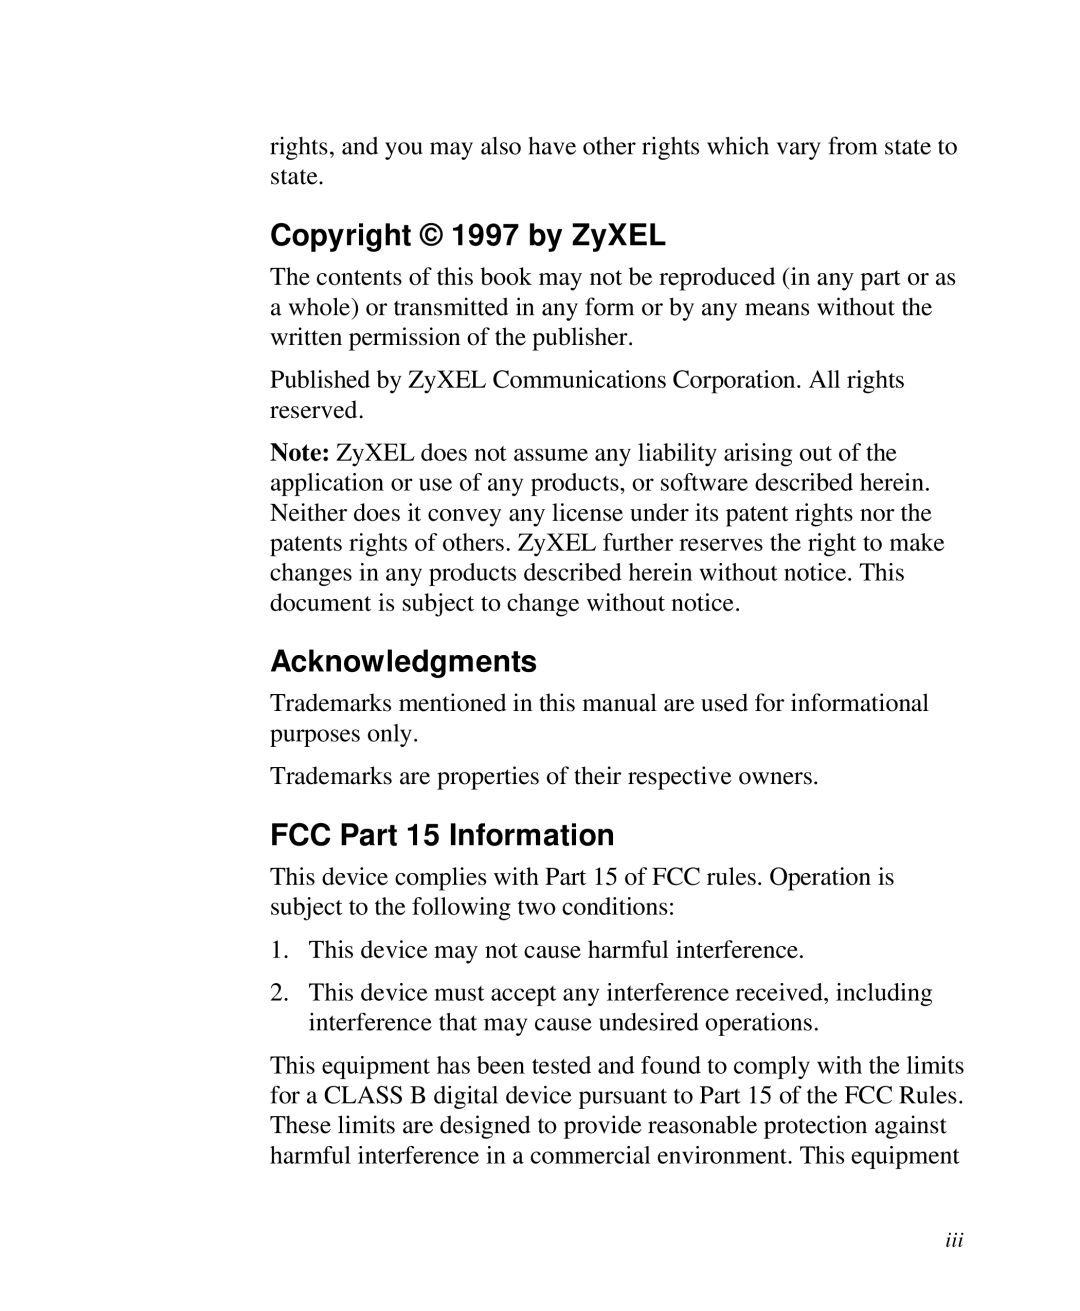 ZyXEL Communications 2864I user manual Copyright 1997 by ZyXEL, Acknowledgments, FCC Part 15 Information 